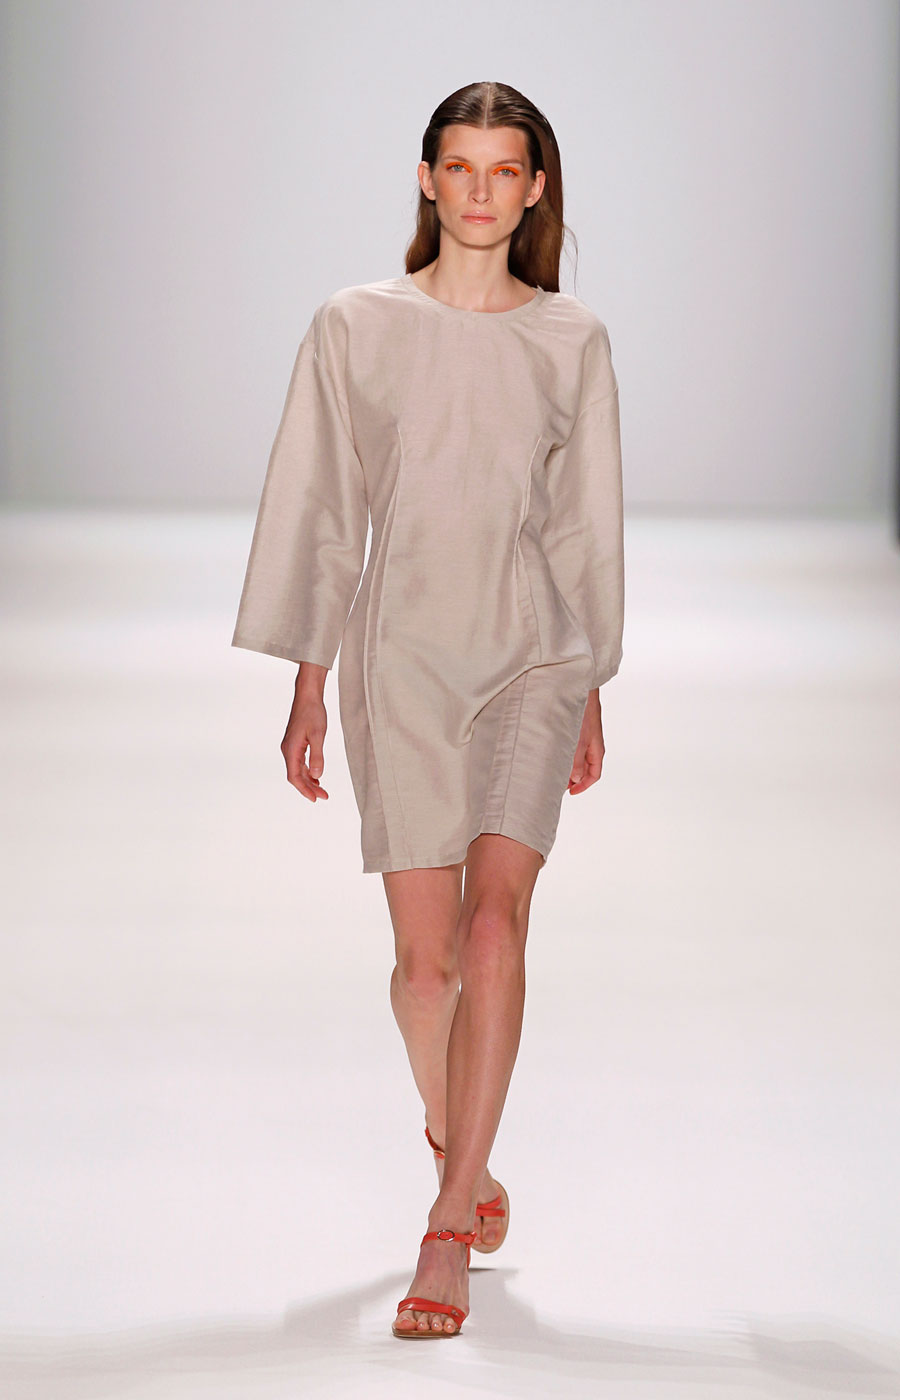 Spring/Summer 2012 by Perret Schaad (1)